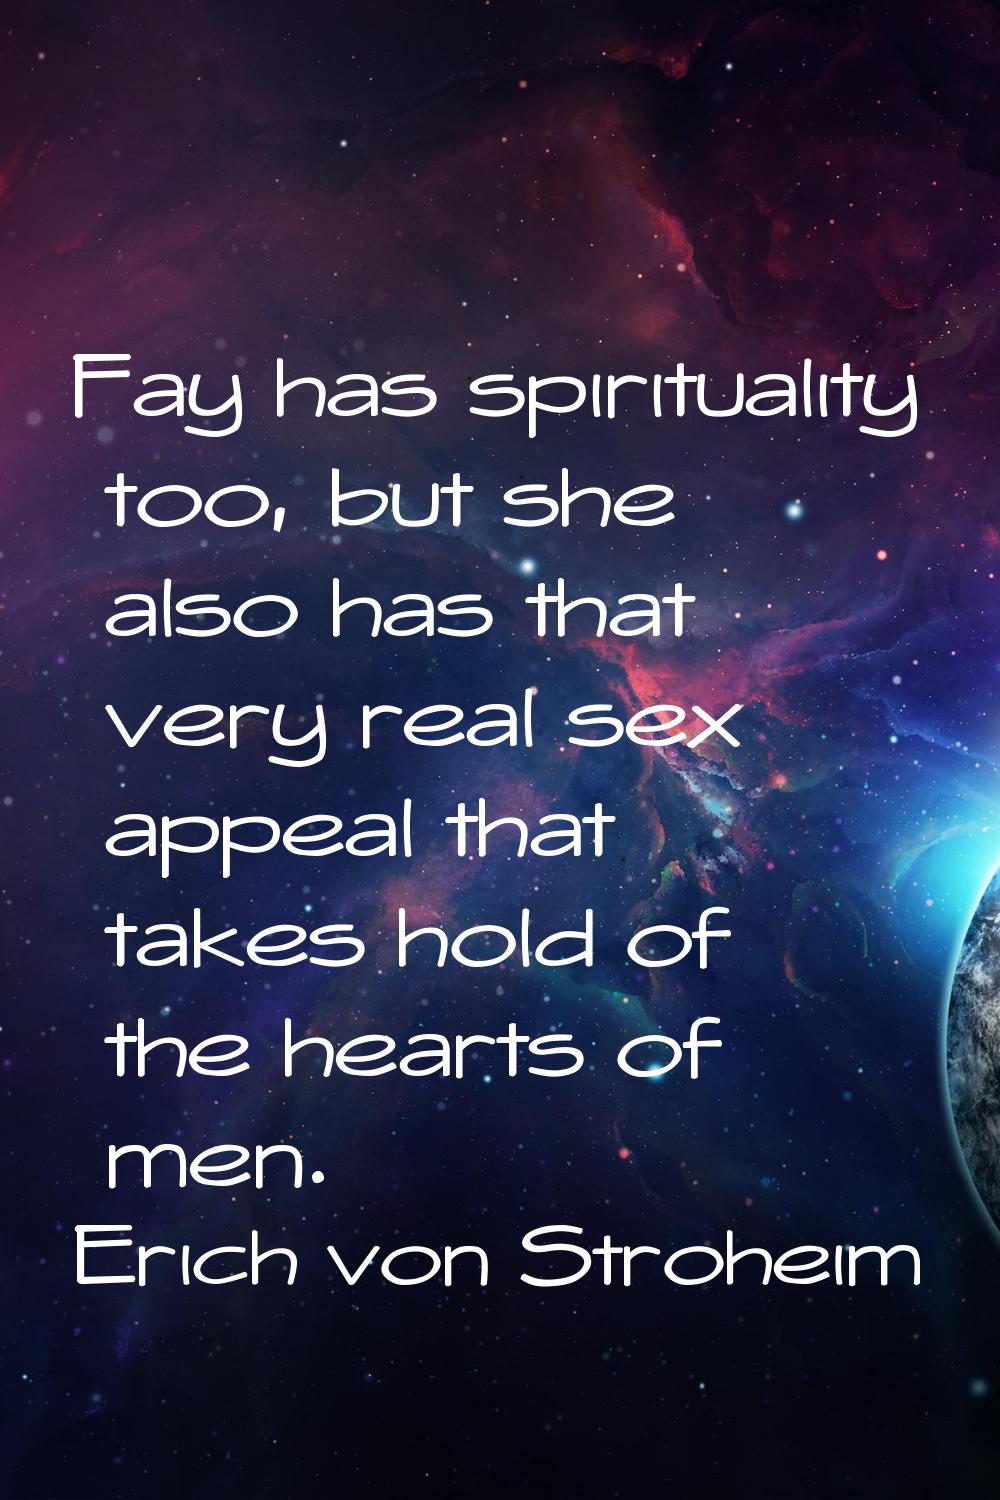 Fay has spirituality too, but she also has that very real sex appeal that takes hold of the hearts 